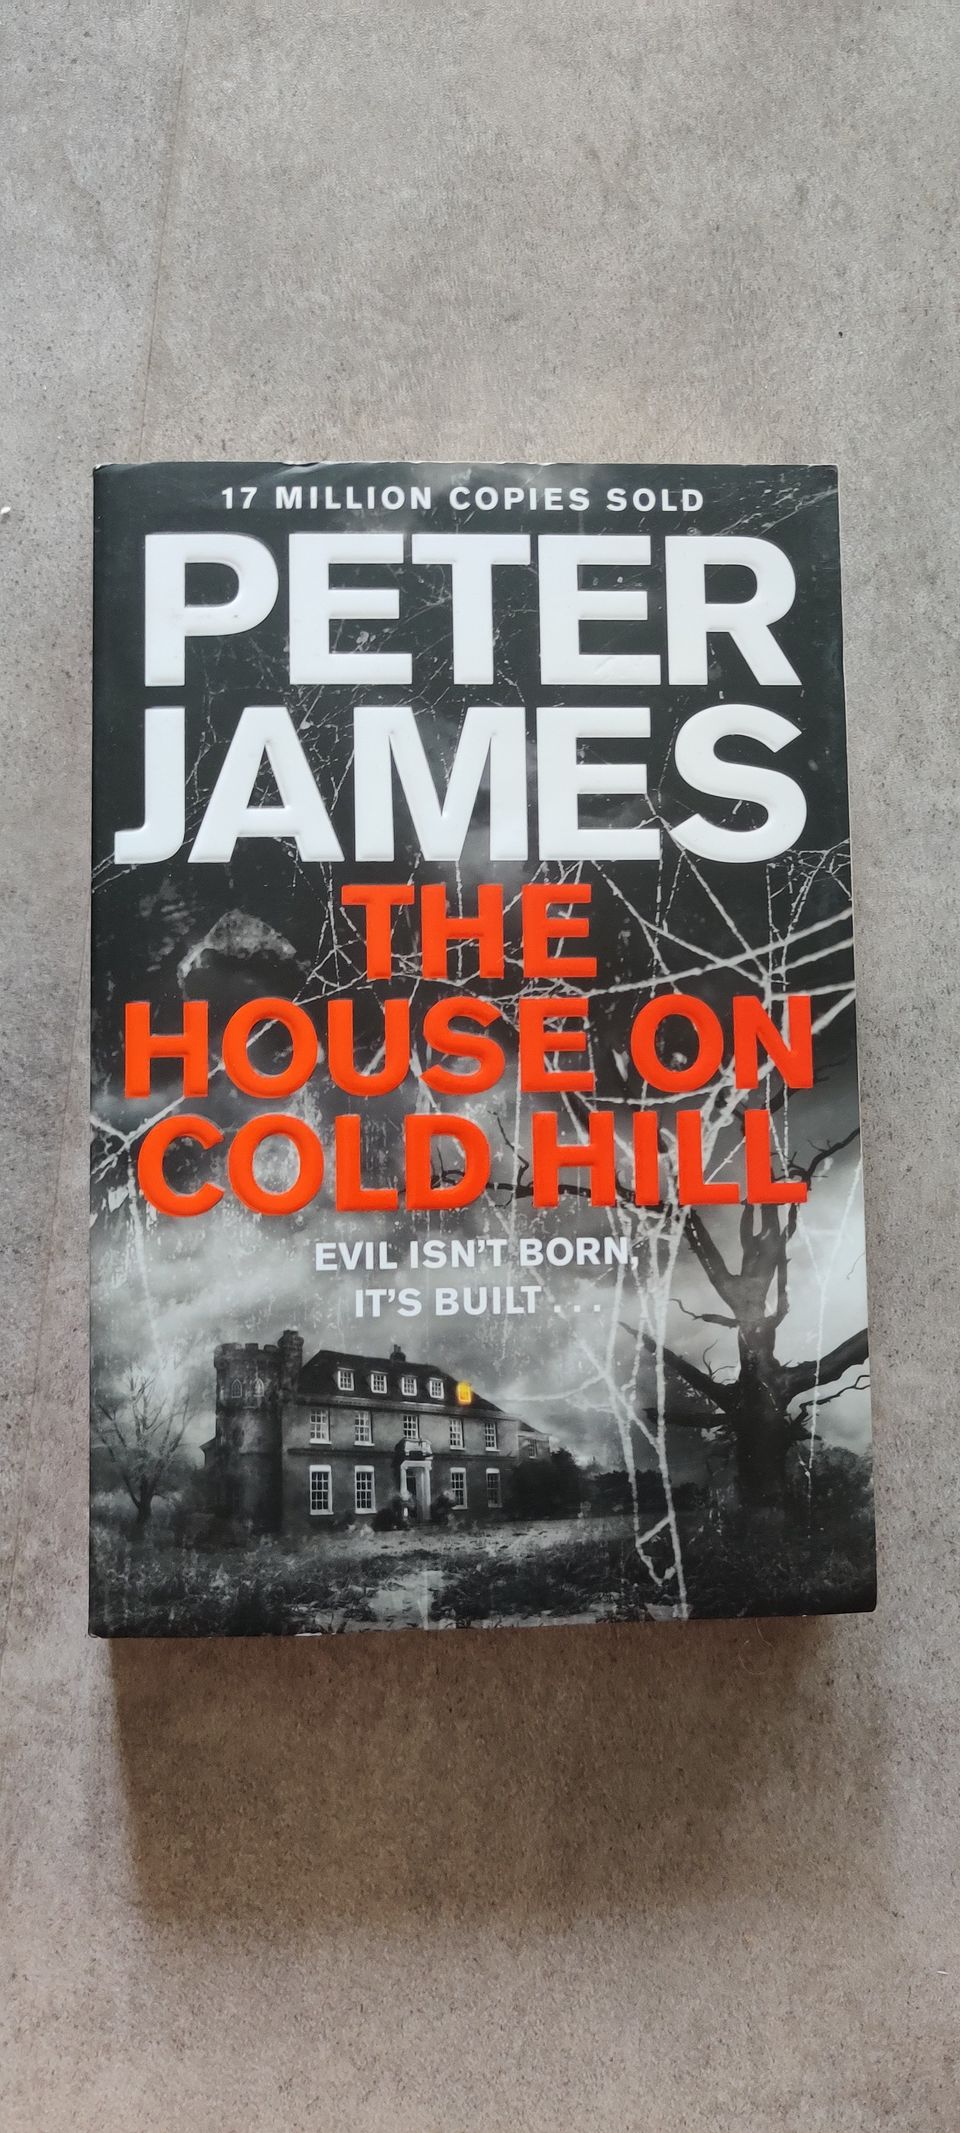 Peter James - the house on cold hill